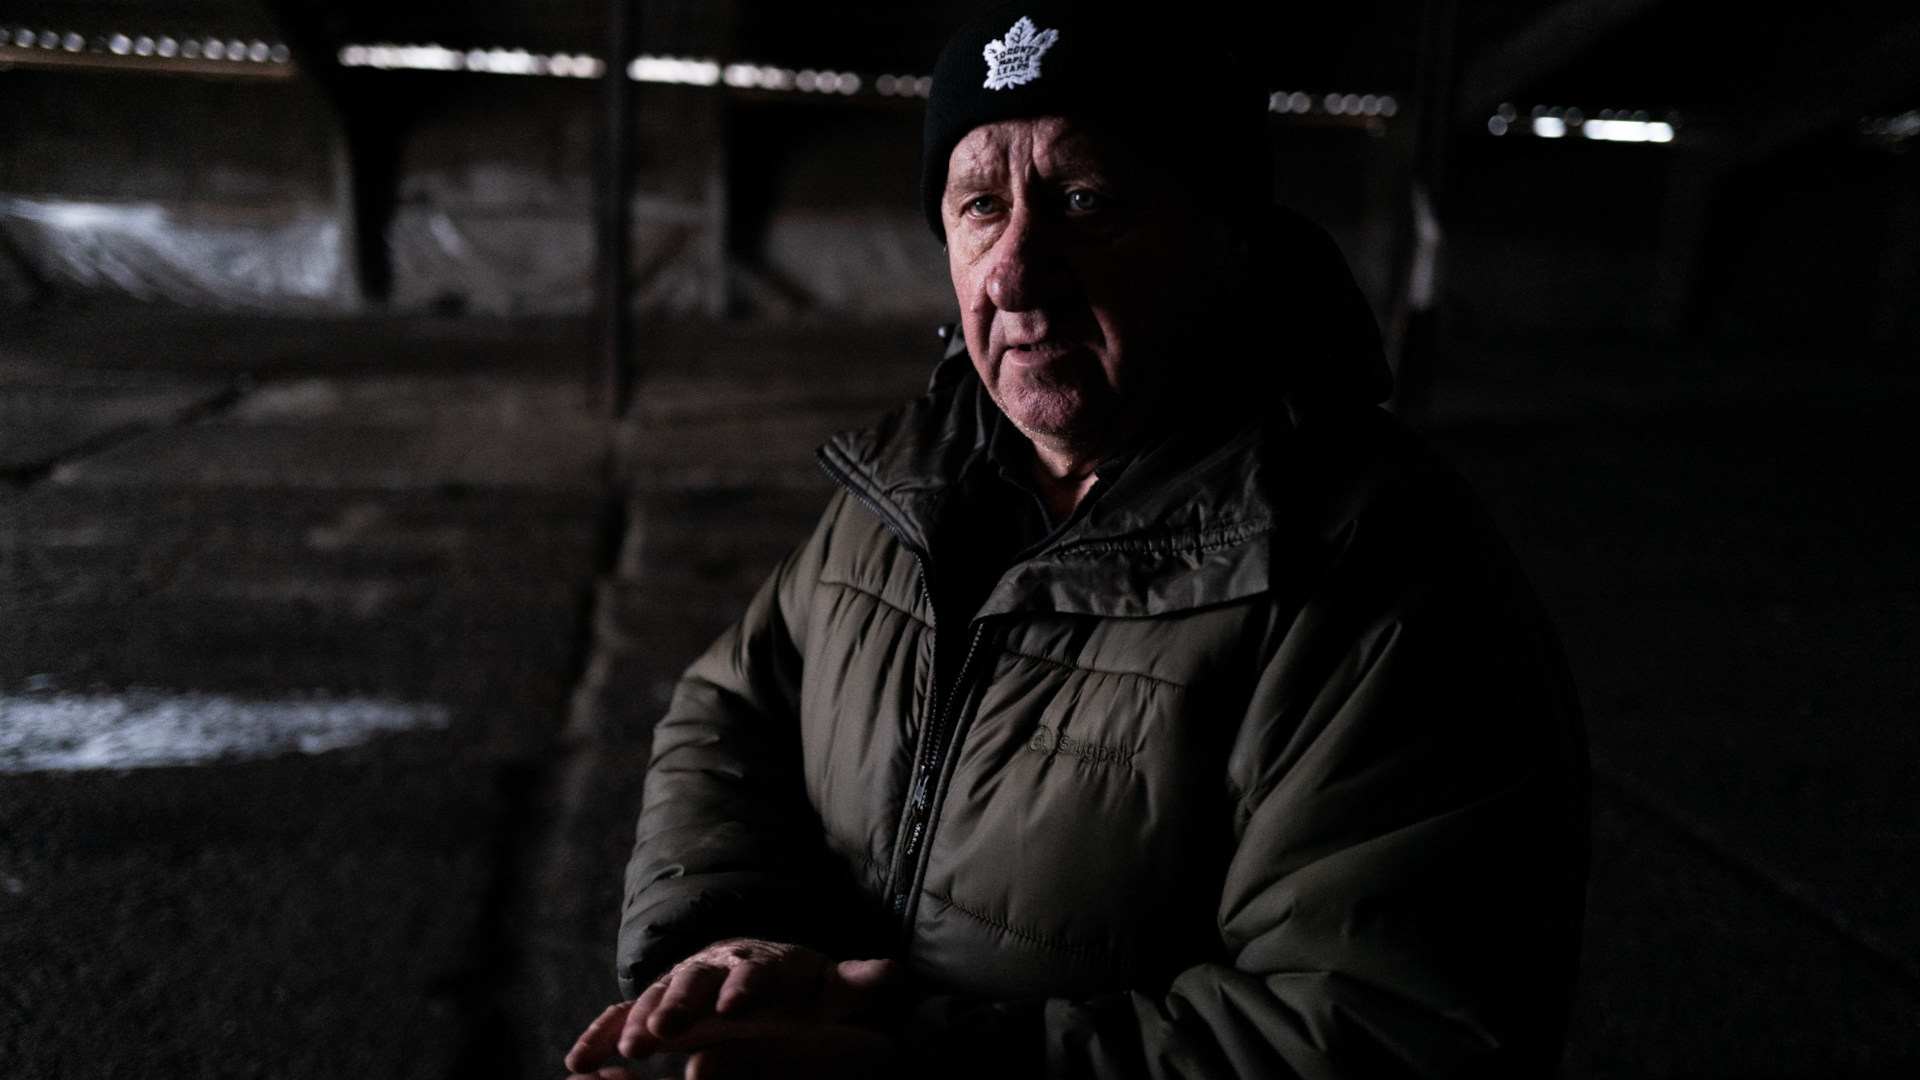 Ukrainian farmer Lyonid Lysachenko describes how a Russian rocket crashed through the roof of his warehouse, destroying a large portion of the grain inside. |  All photos by KERN HENDRICKS for UNDARK